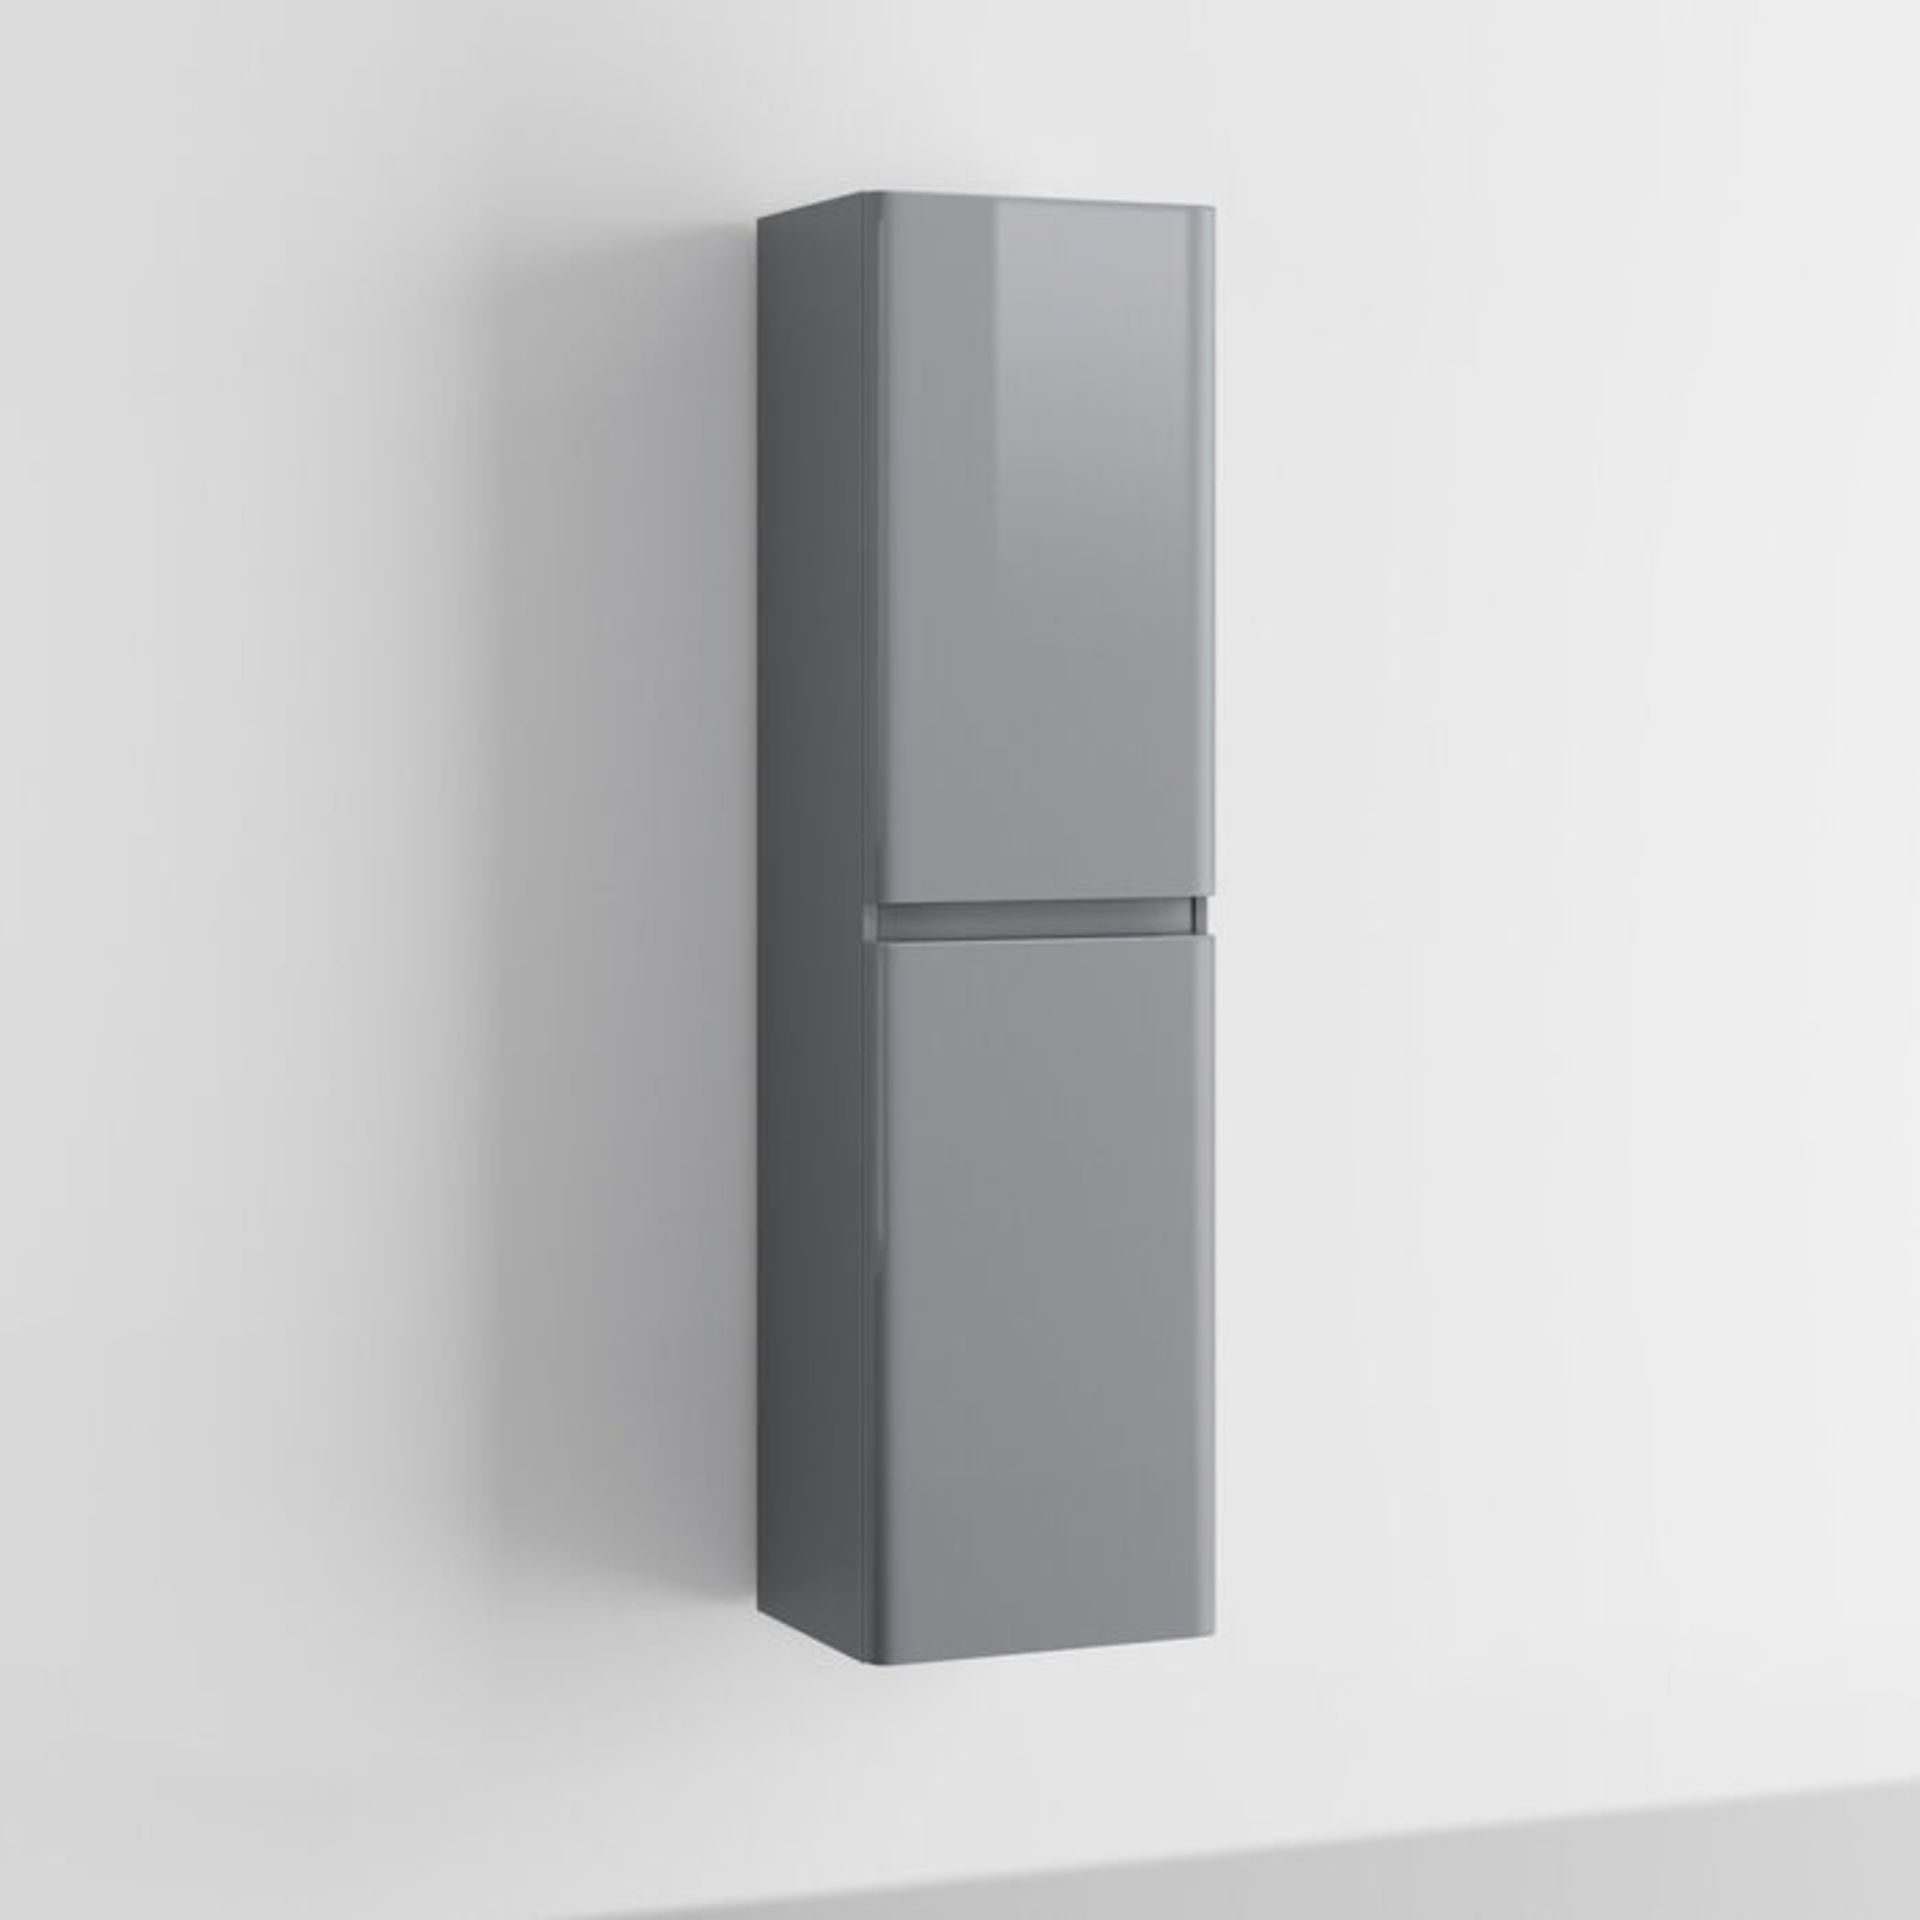 (RR3) 1400mm Denver Gloss Grey Tall Wall Hung Storage Cabinet - Wall Hung. RRP £399.99. Great ...(( - Image 4 of 4